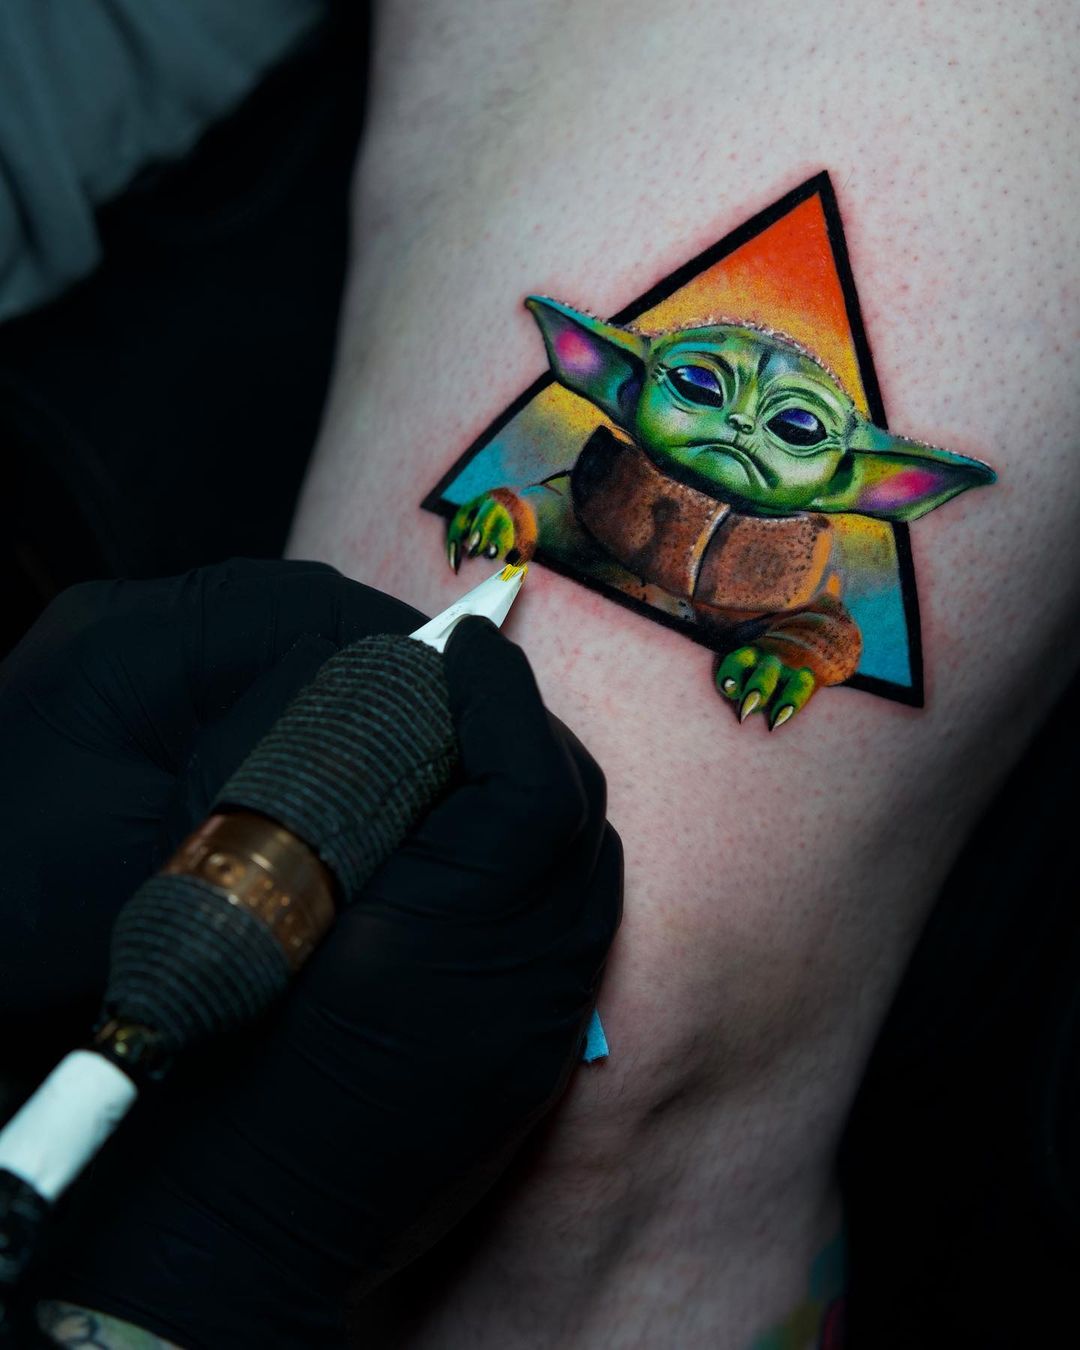 25 baby yoda tattoos that prove the child is the cutest thing ever